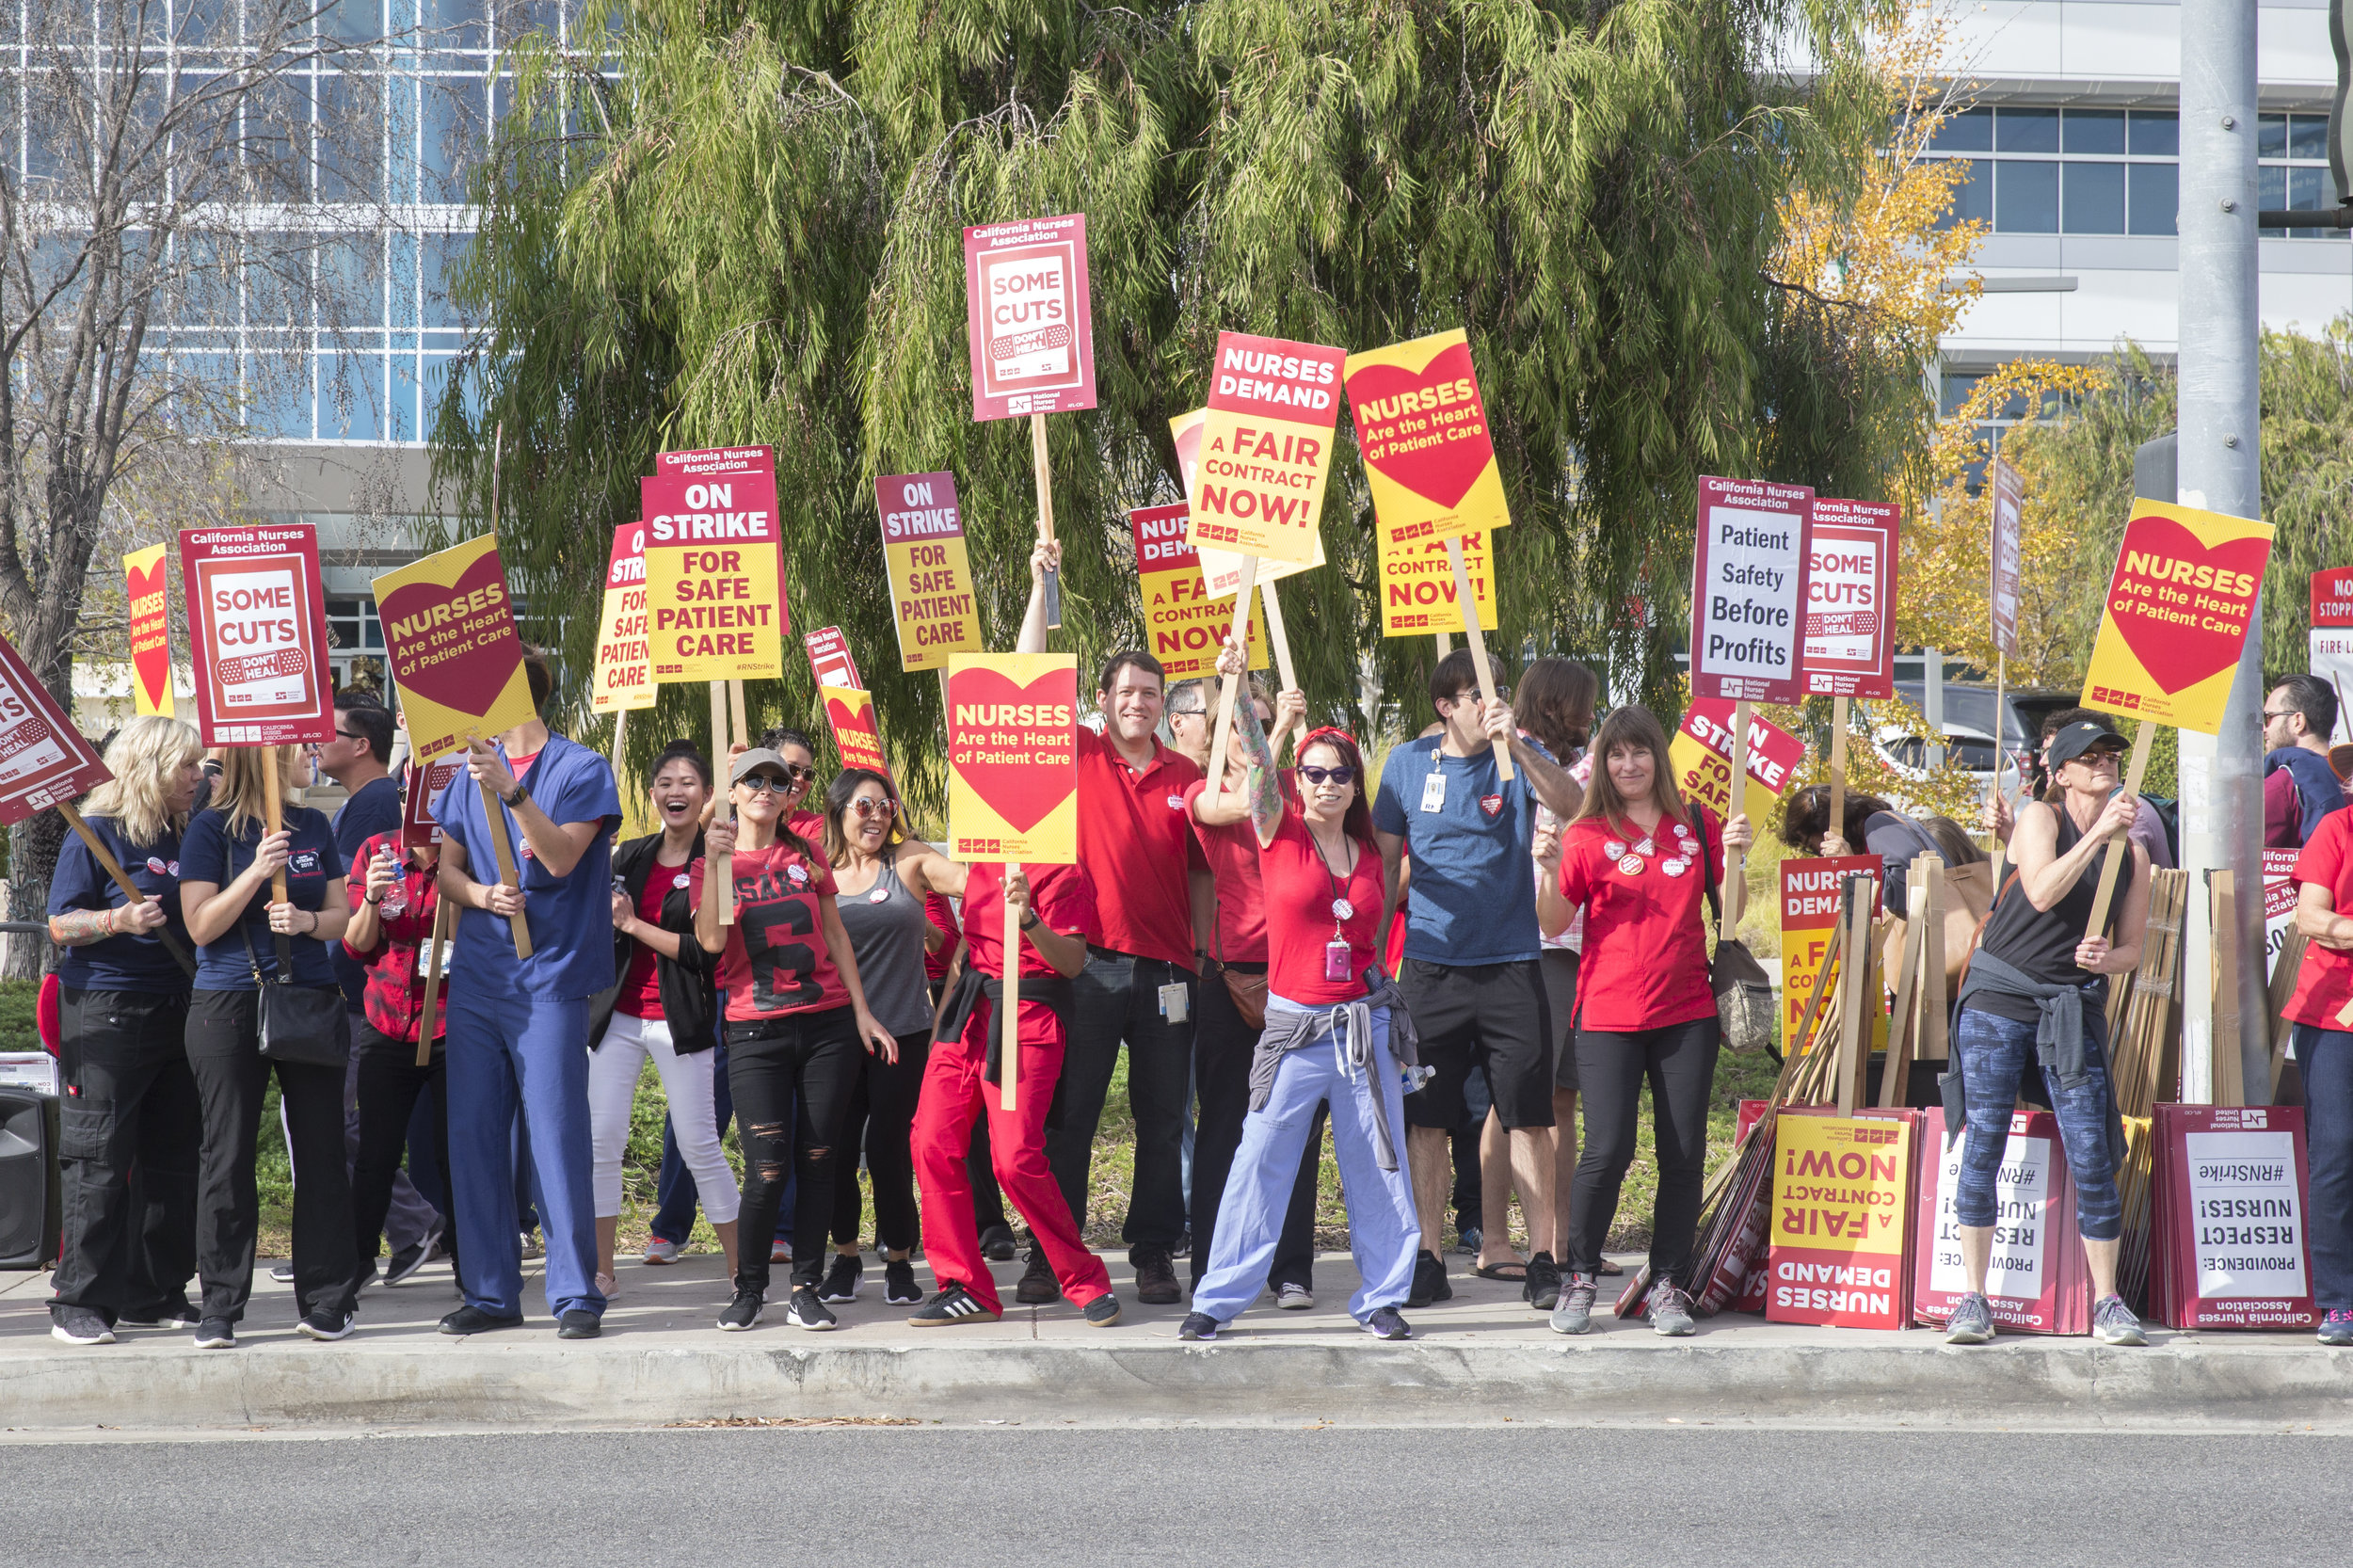  Members of the California Nurses Association protest at a Nurses Strike outside of Providence Saint Johns Health Center in Santa Monica, California on November 27, 2018. The nurses were striking over the unfair treatment they are receiving from Prov